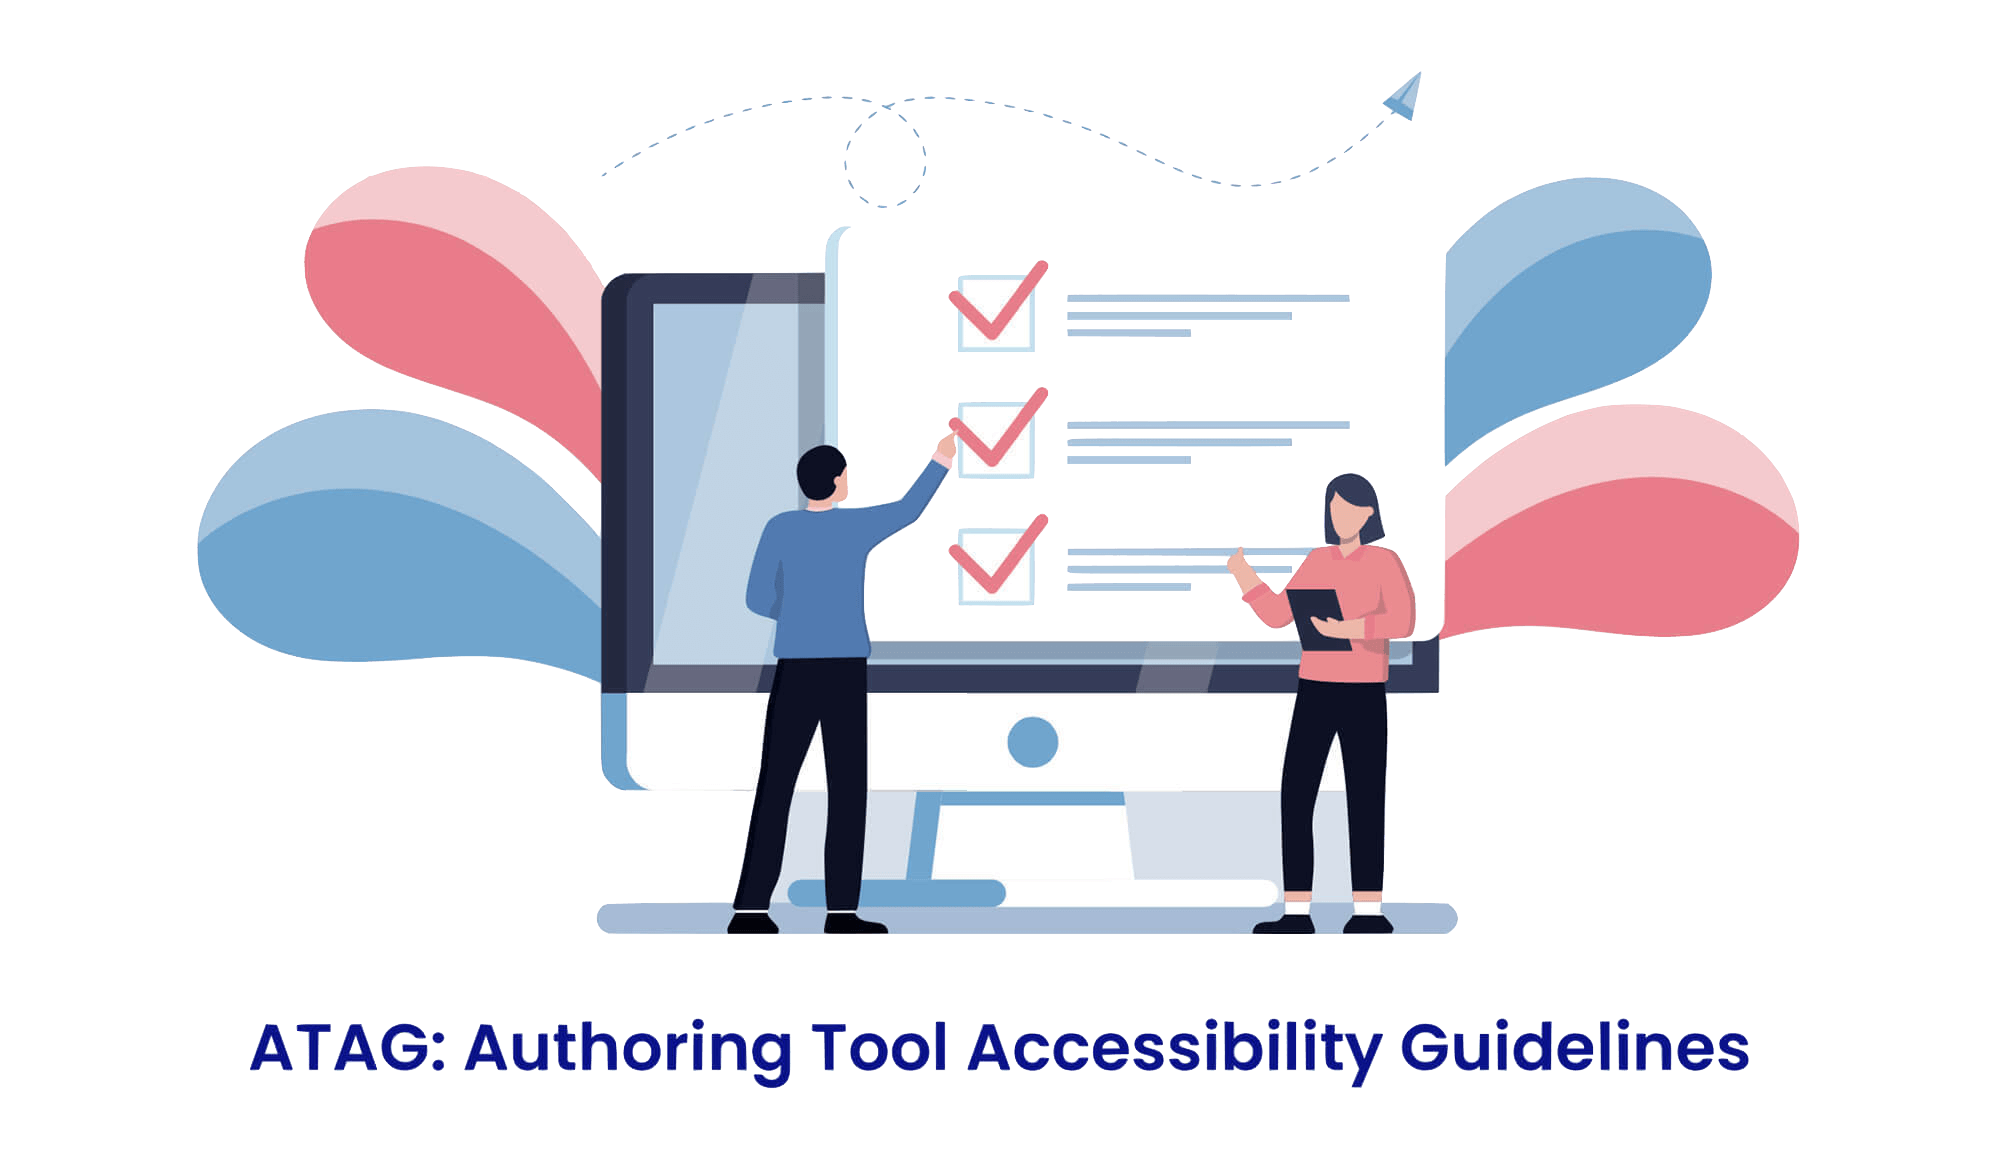 ATAG 2.0 Guidelines Testing Tool: illustration of checklist on a laptop